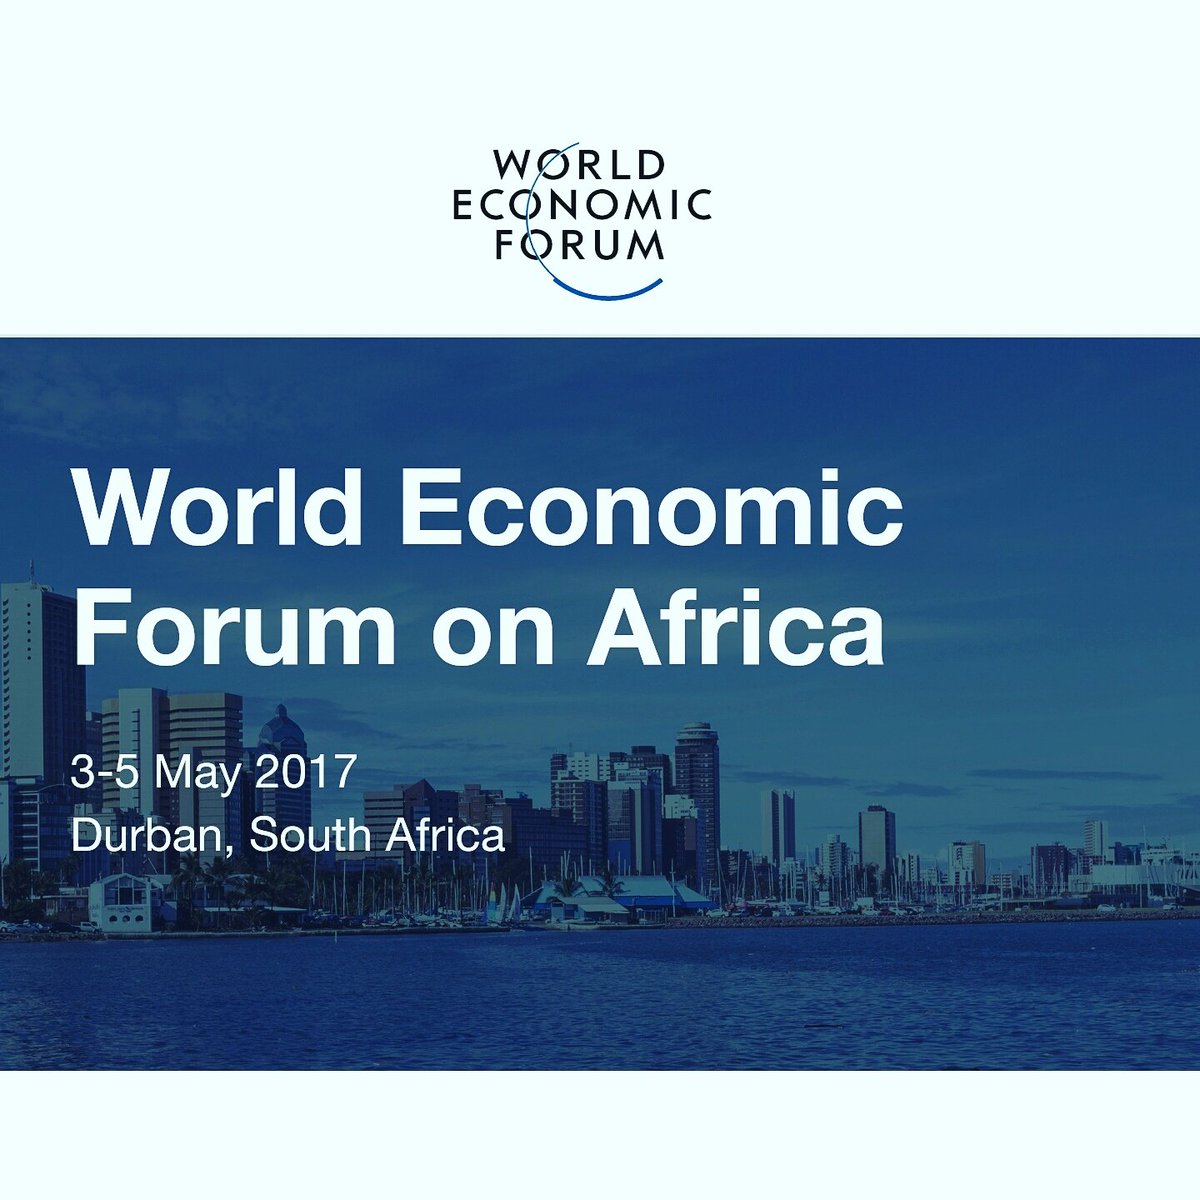 World Economic Forum on Africa Holds in South Africa 3-5 May 2017